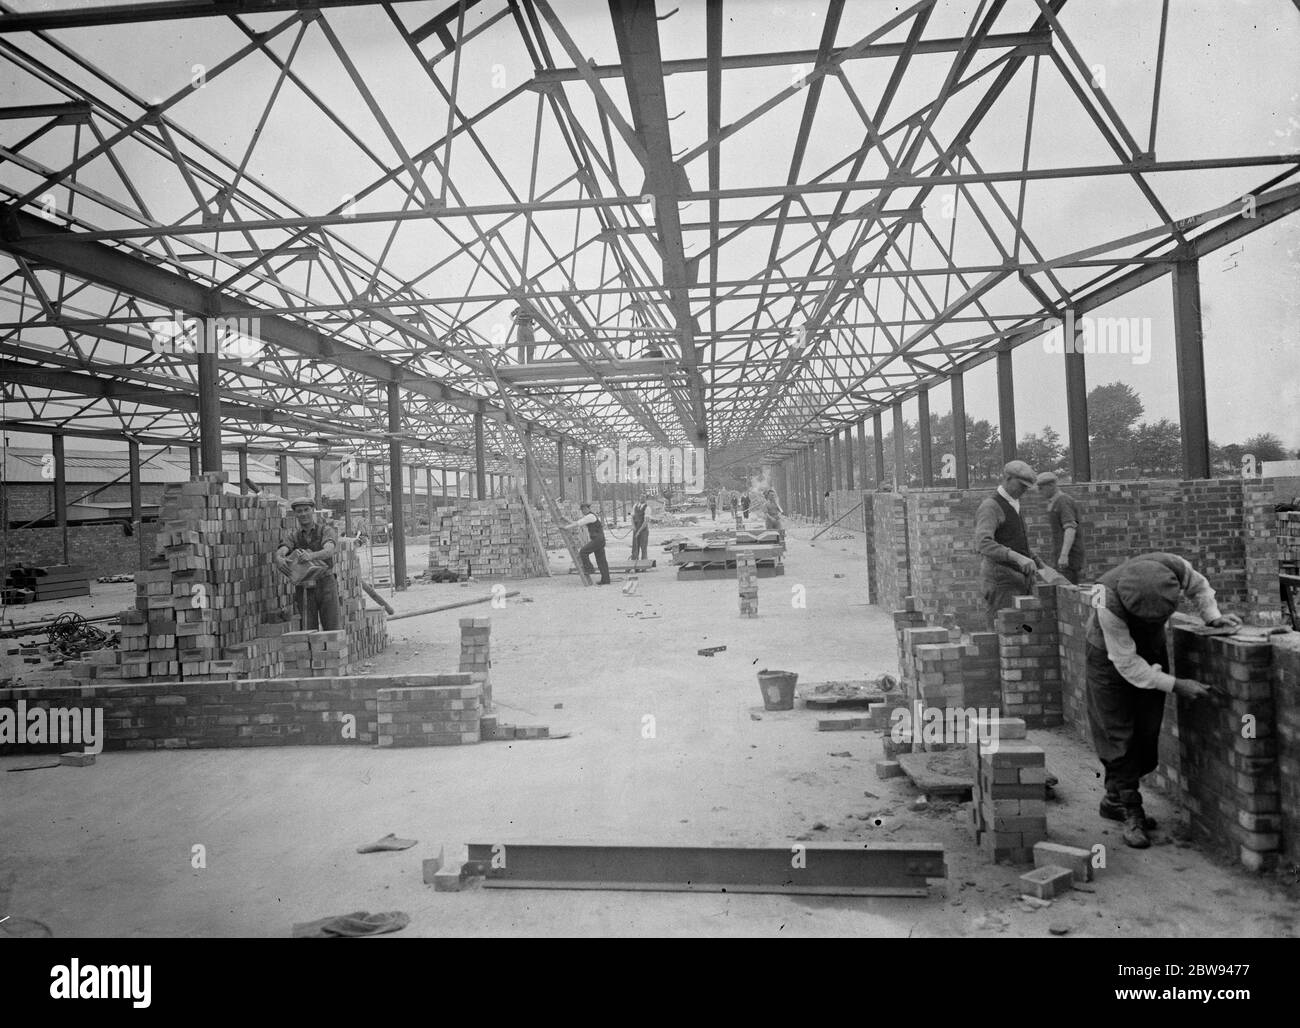 The St Helens Cable & Rubber Company Limited factory being constructed in Slough , Buckinghamshire . The steel work is being carried out by Edward Wood & Company . 1938 Stock Photo